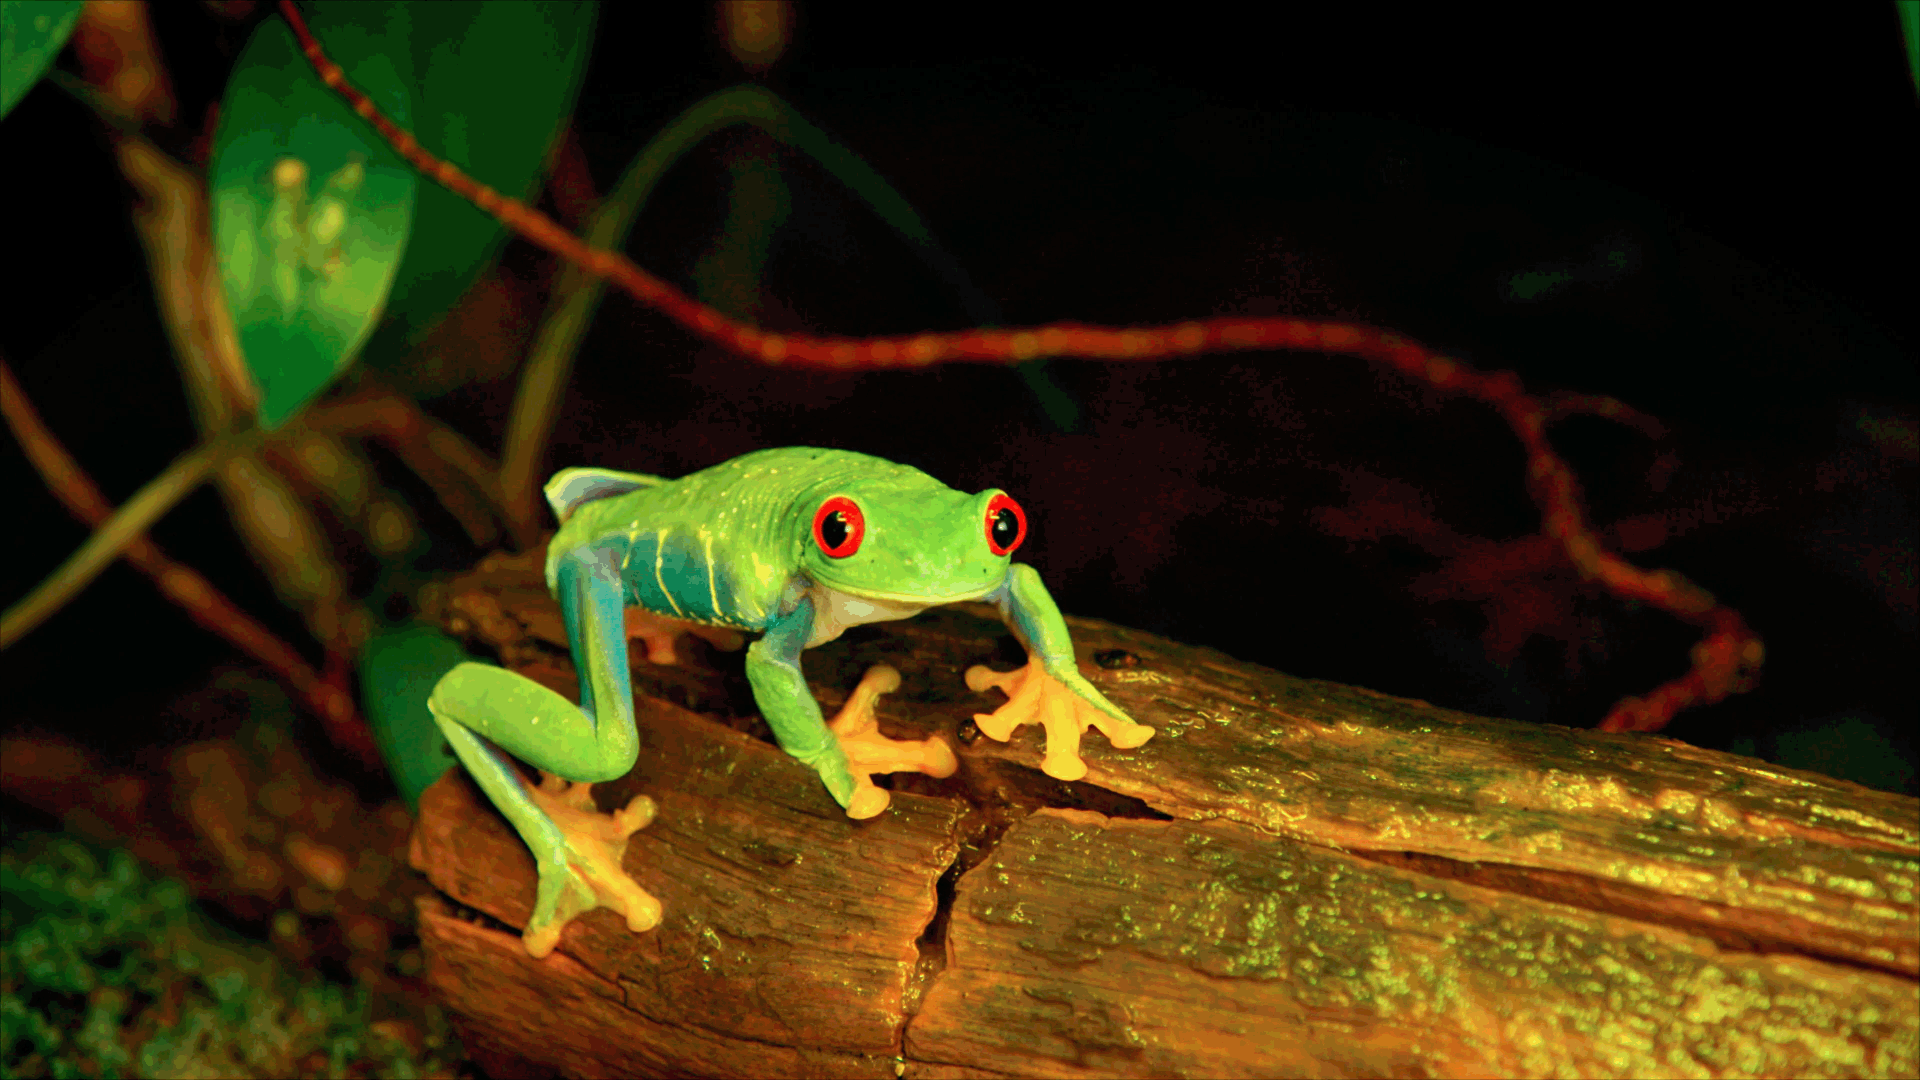 Blue Skye Nature - Frogs